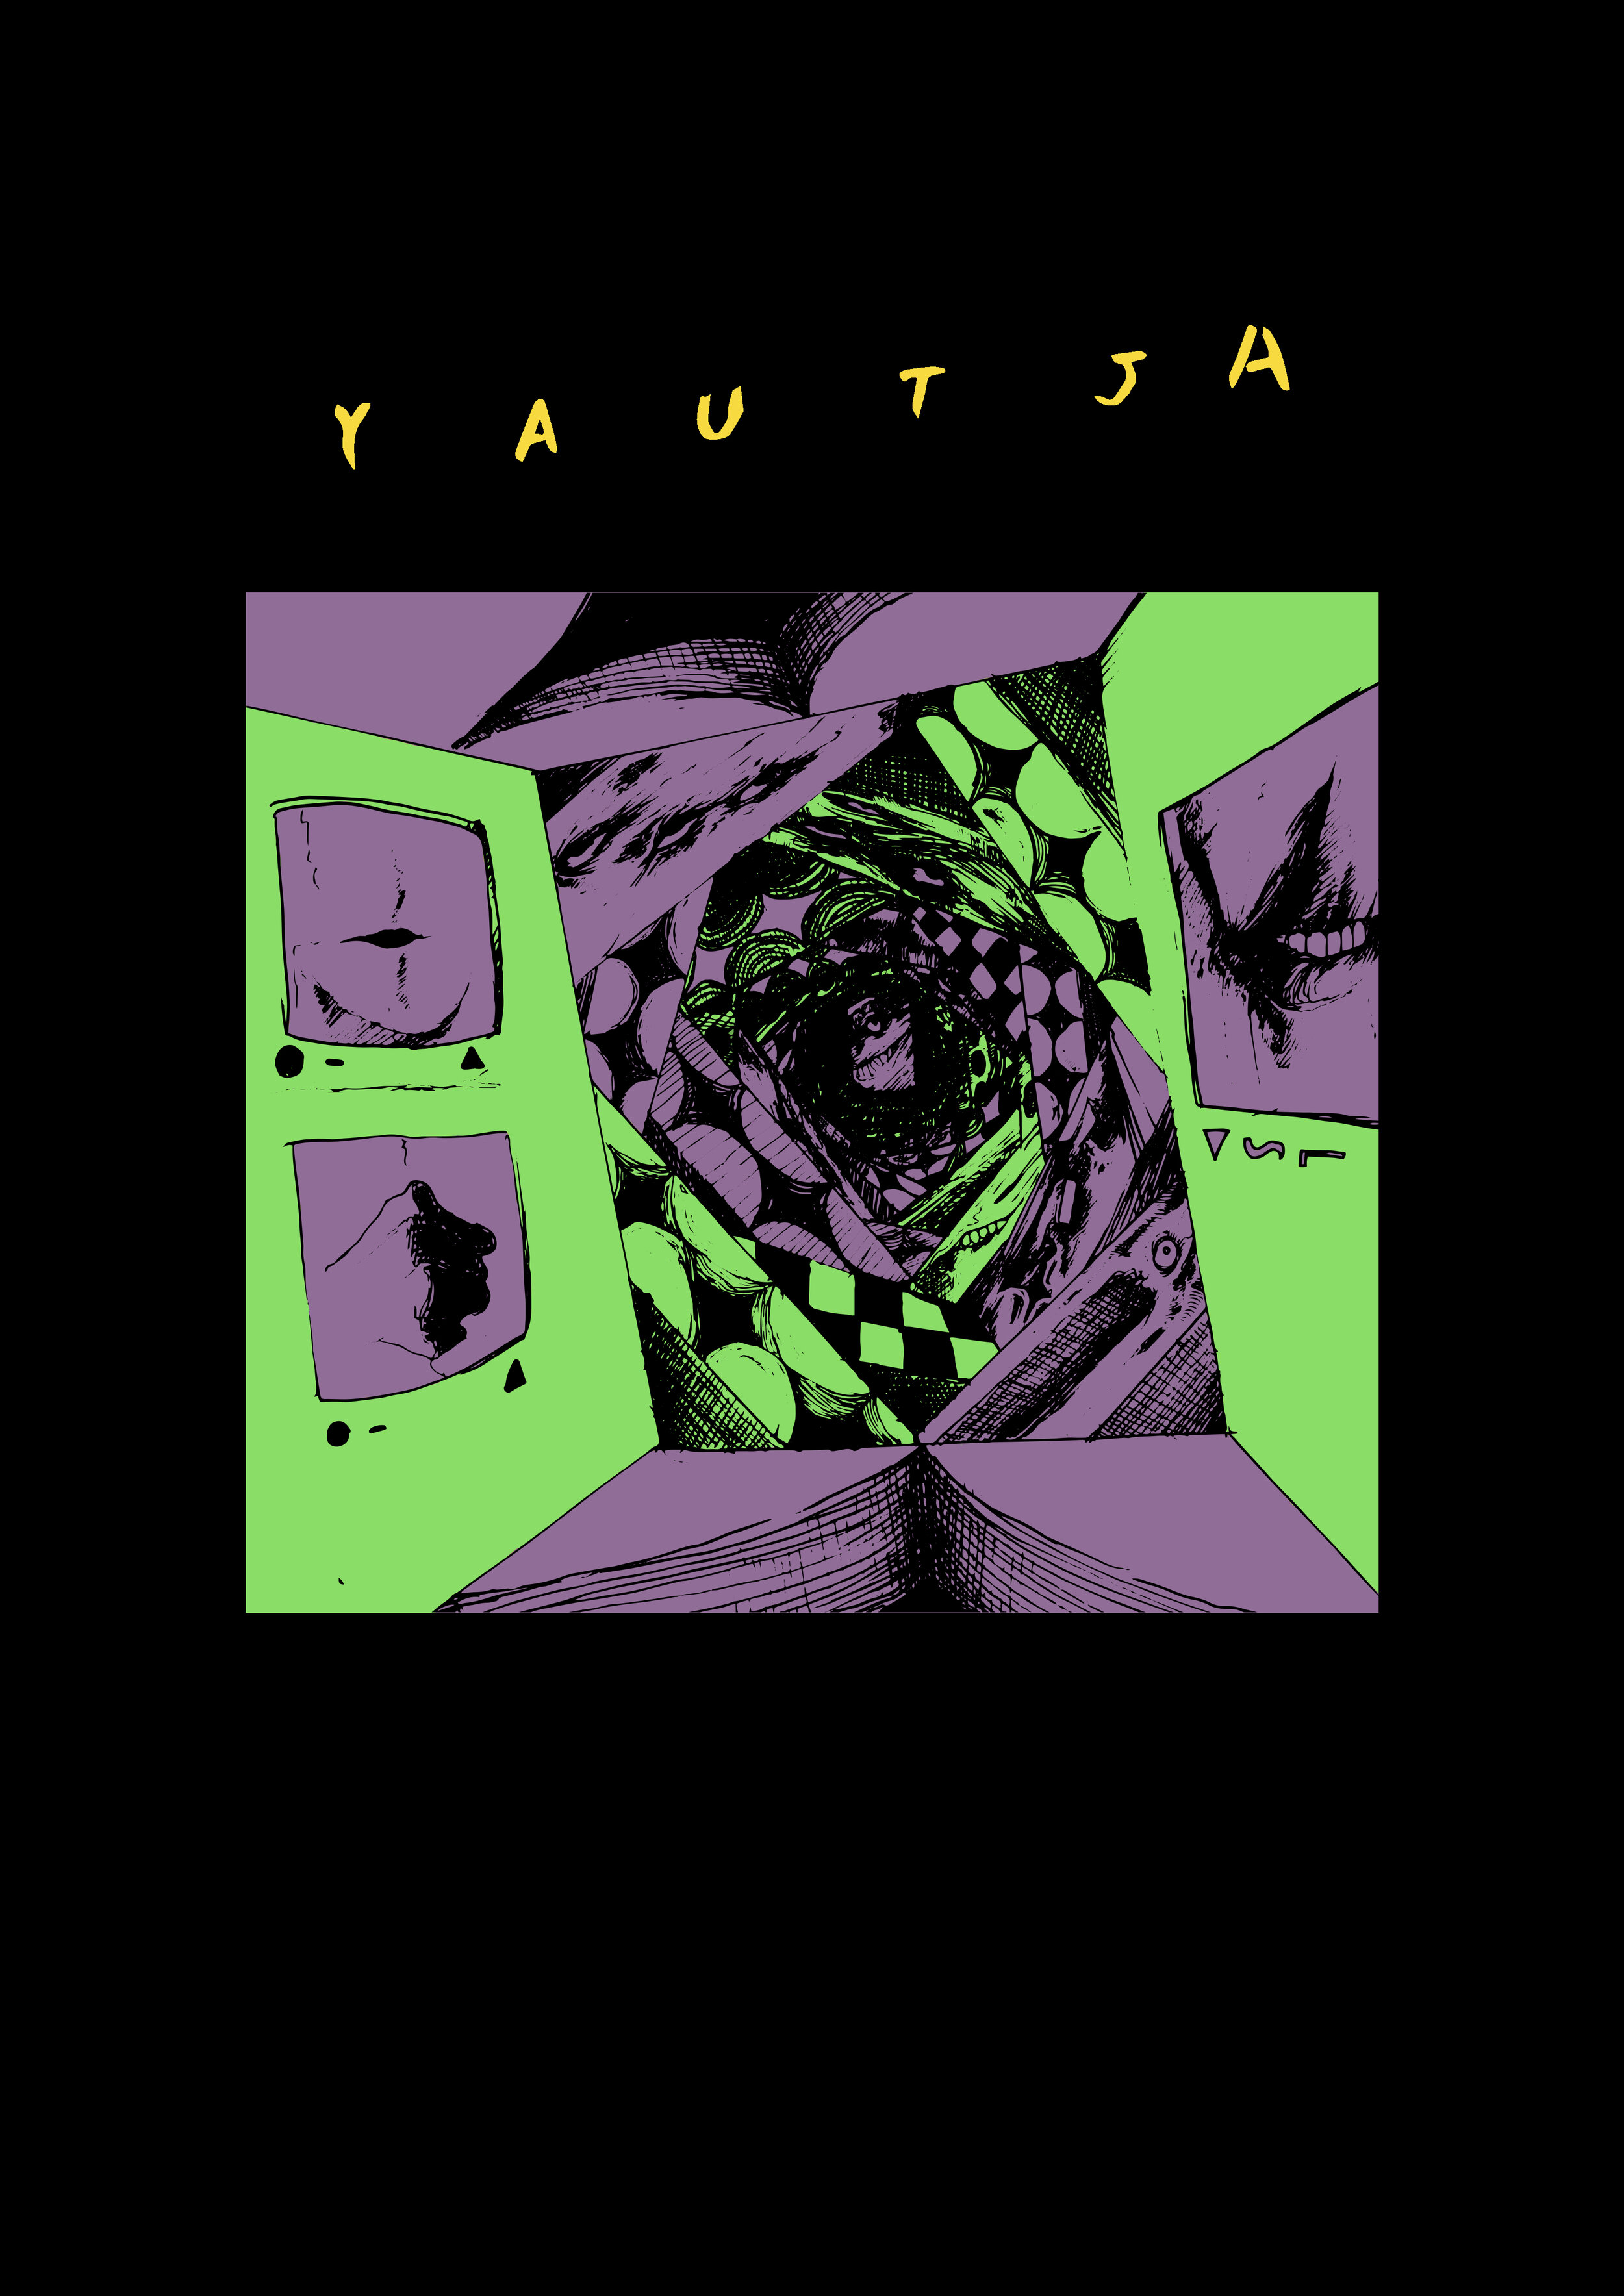  2021. “Constantine” shirt design for Yautja. Printed by Relapse Records. 